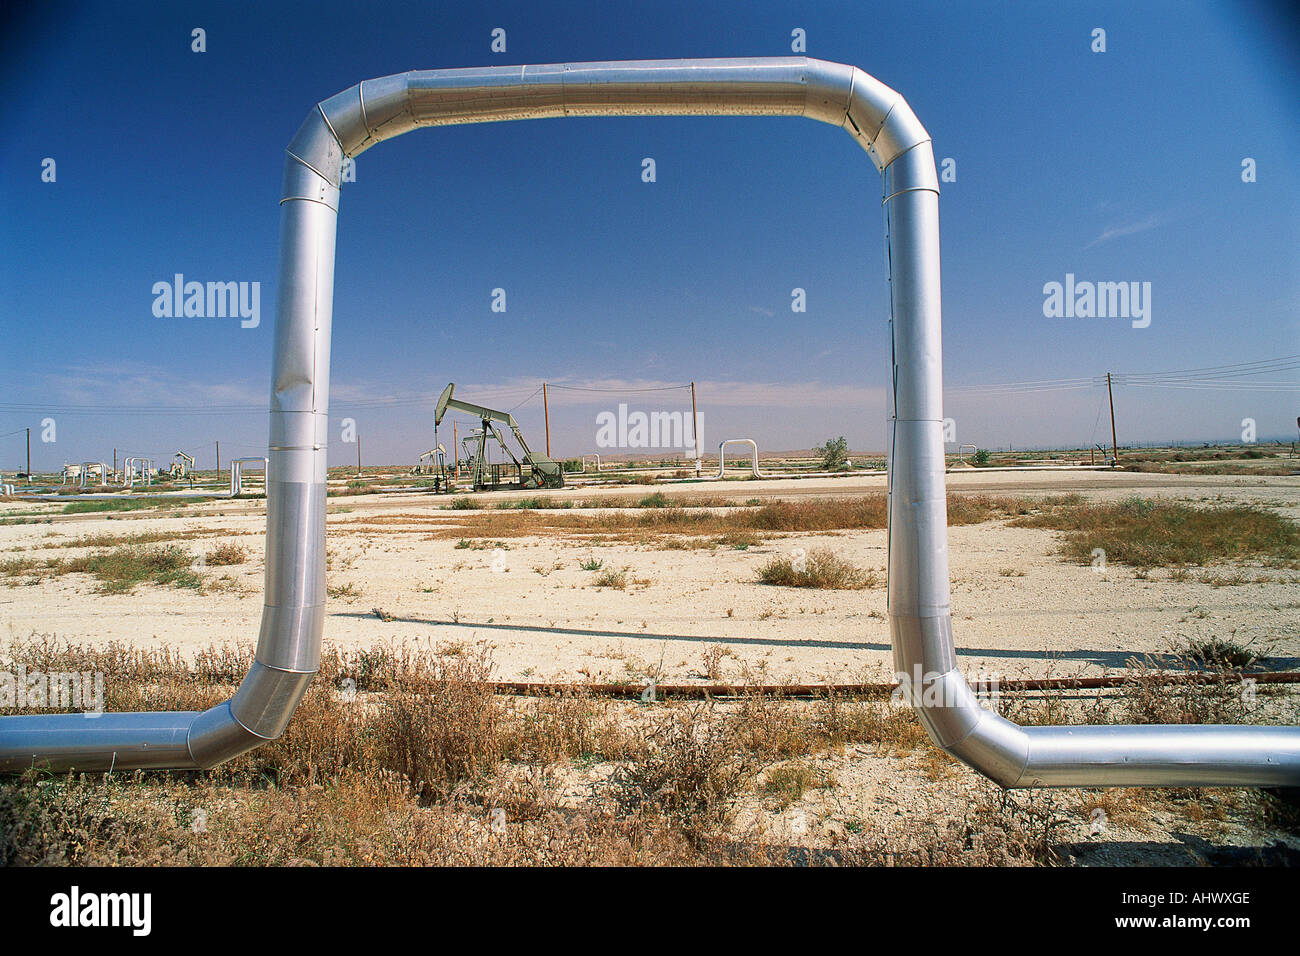 Piping with pump jack in background Stock Photo